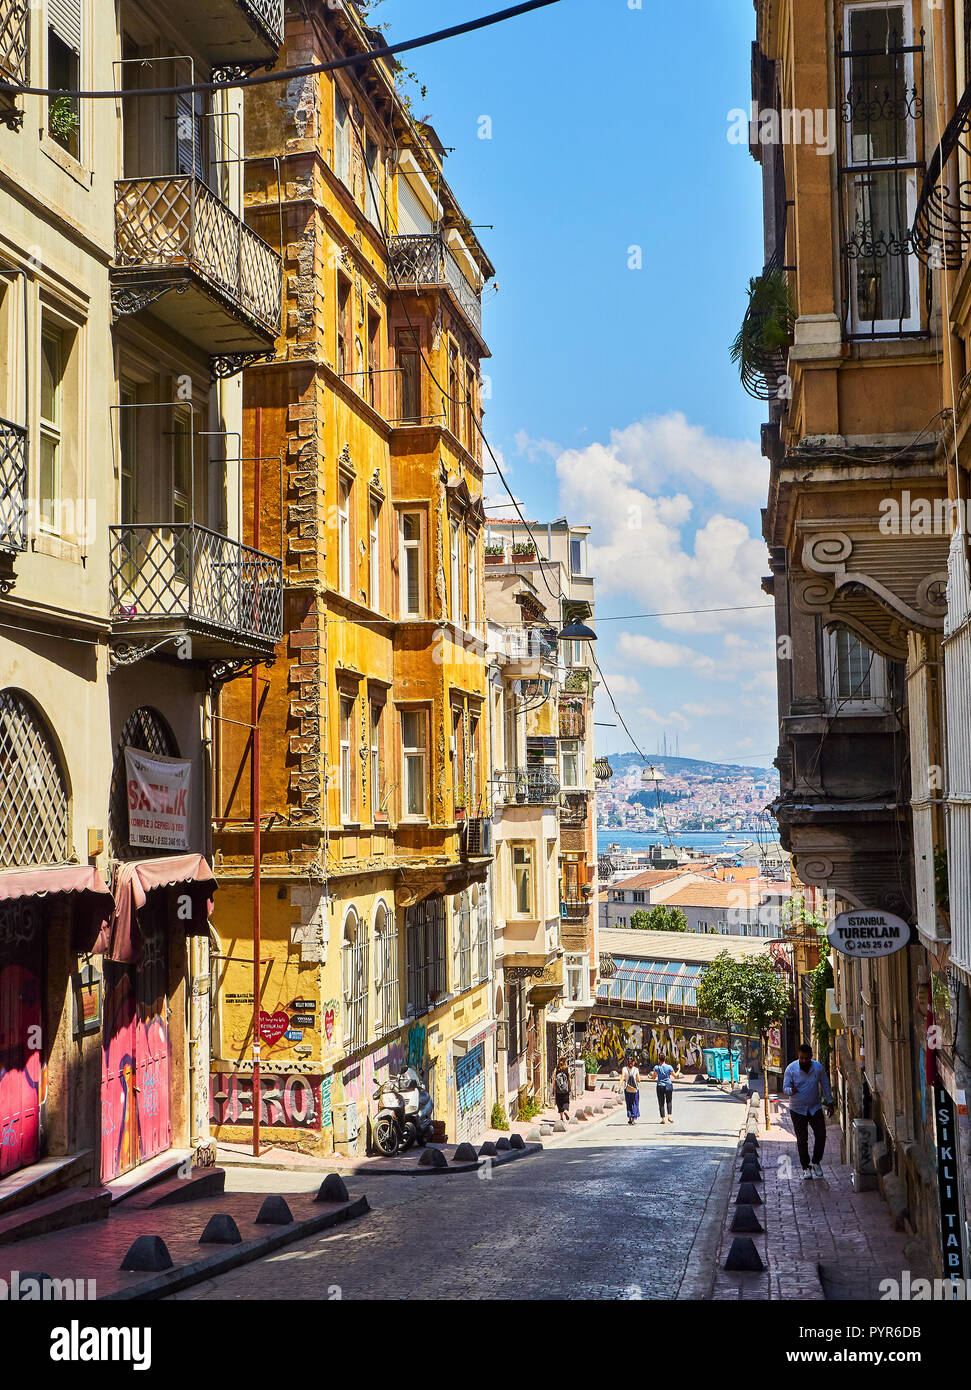 Typical buildings of the Luleci Hendek street, Karakoy district, with the mouth of the Bosphorus in the background. Istanbul, Turkey. Stock Photo